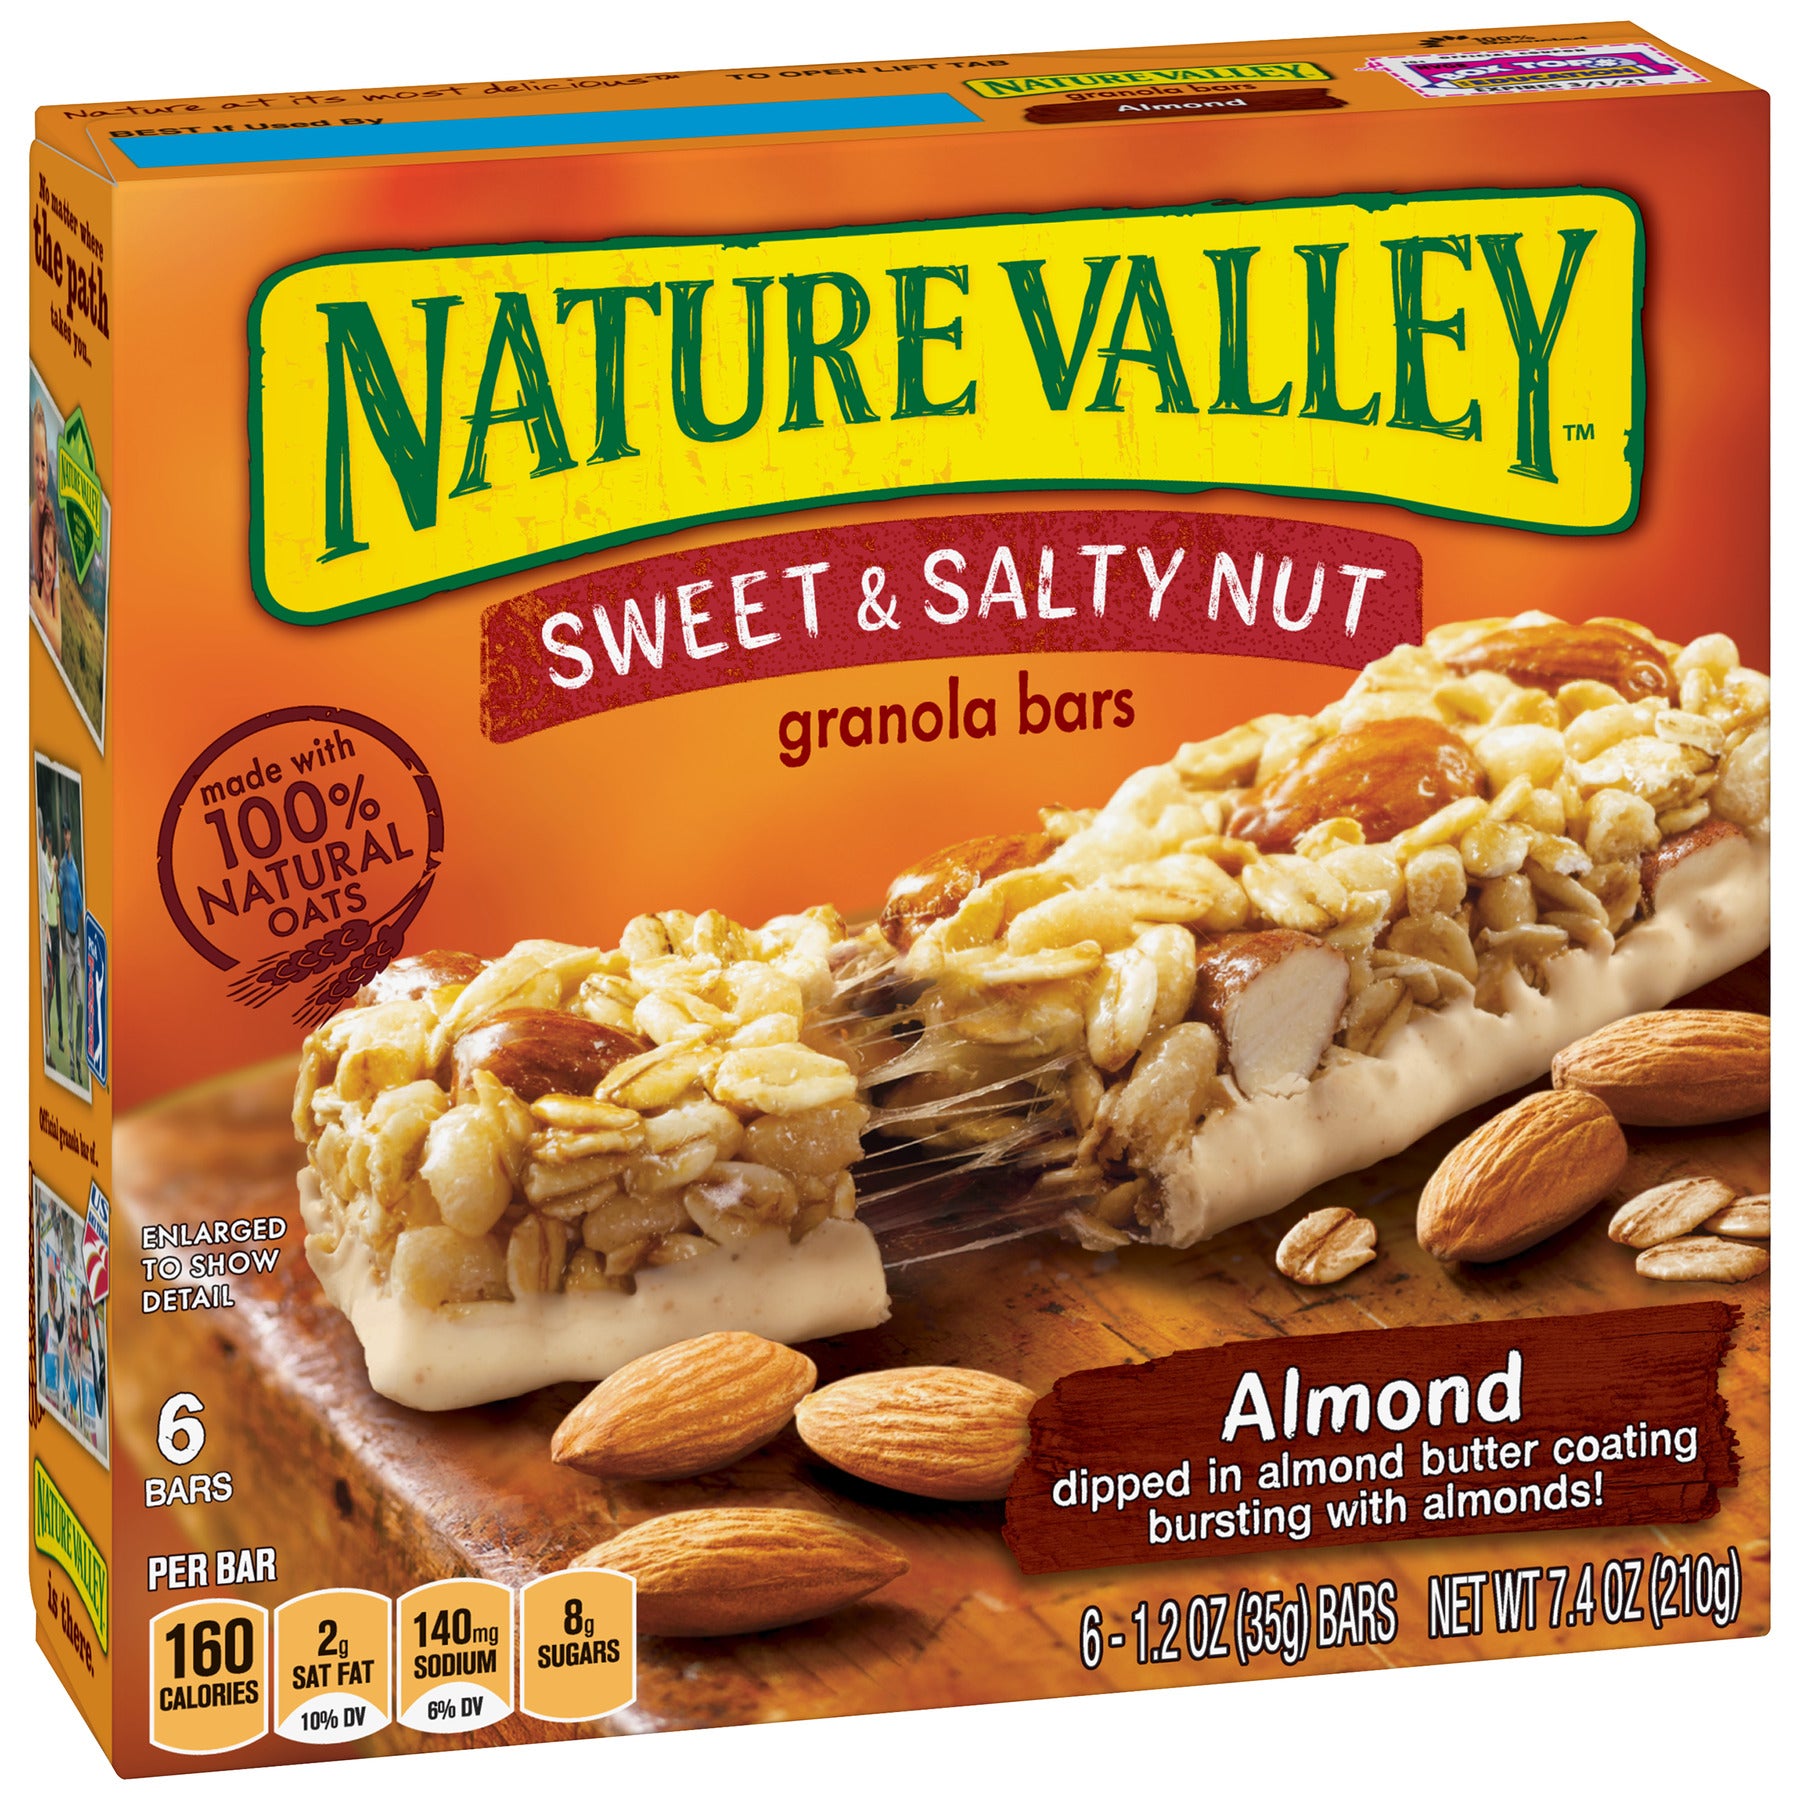 Nature Valley Sweet & Salty Almond Bar 7.4oz